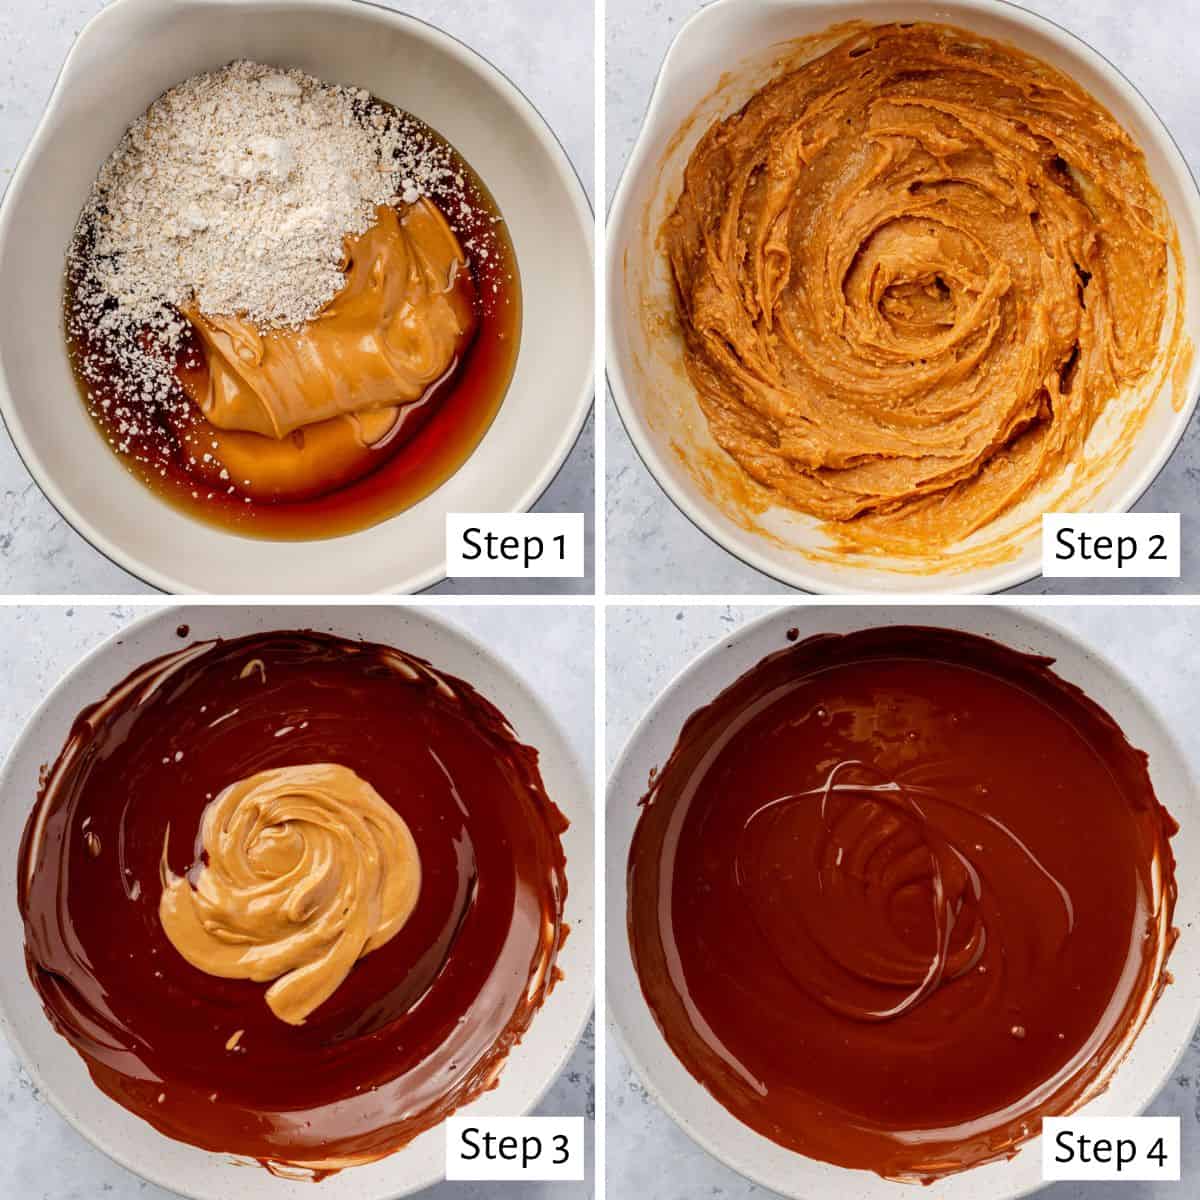 4-image collage of mixing ingredients: 1 - Peanut butter, oat flour, and syrup in a bowl before mixing; 2 - After mixing; 3 - Chocolate after melting with peanut butter added; 4 - After mixing.